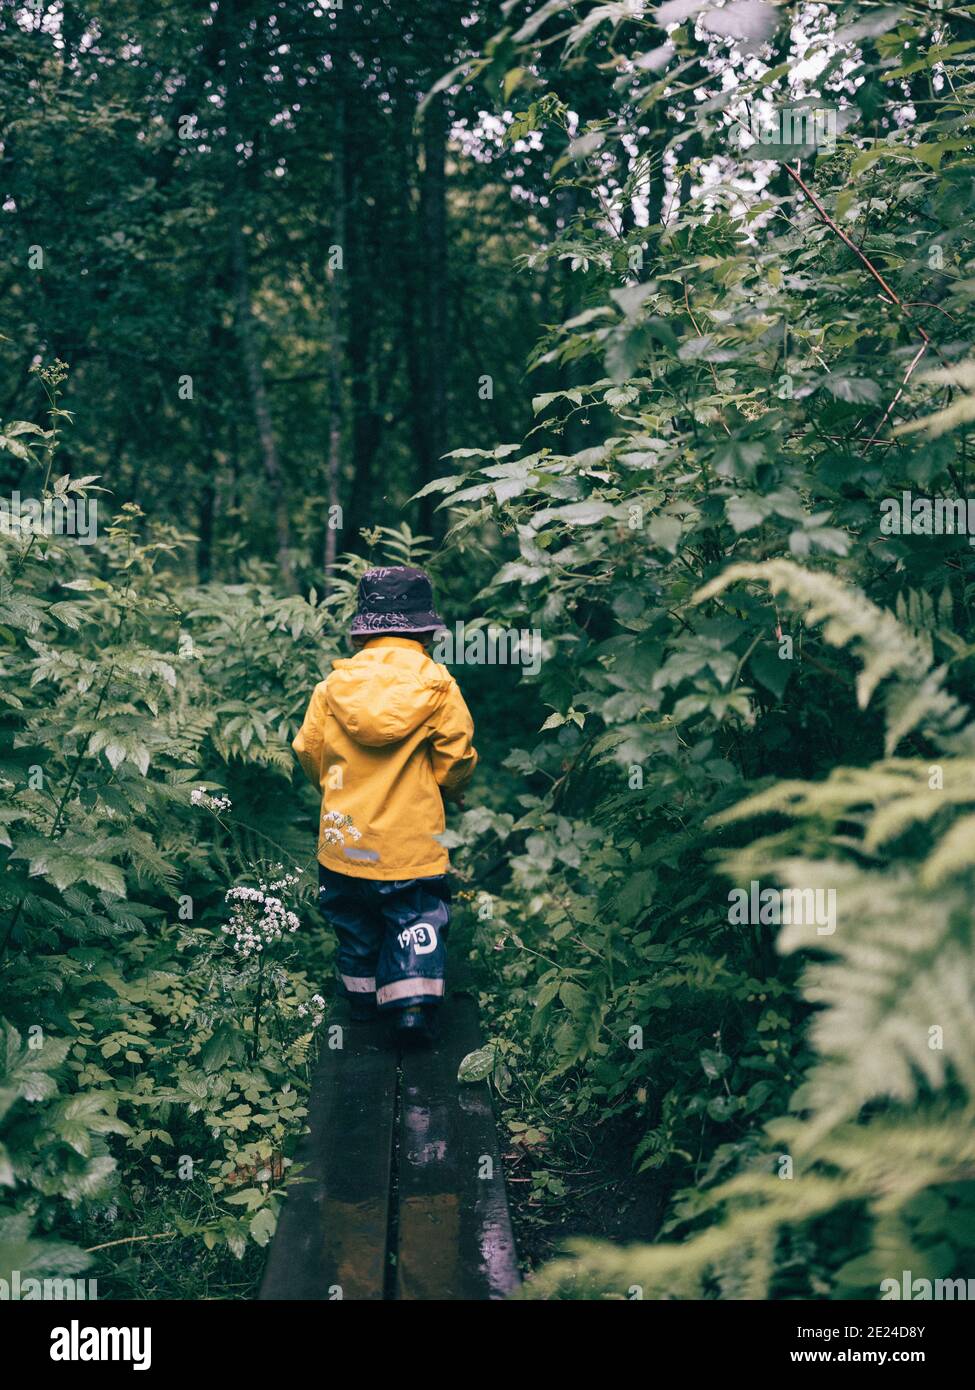 Toddler walking in forest Stock Photo